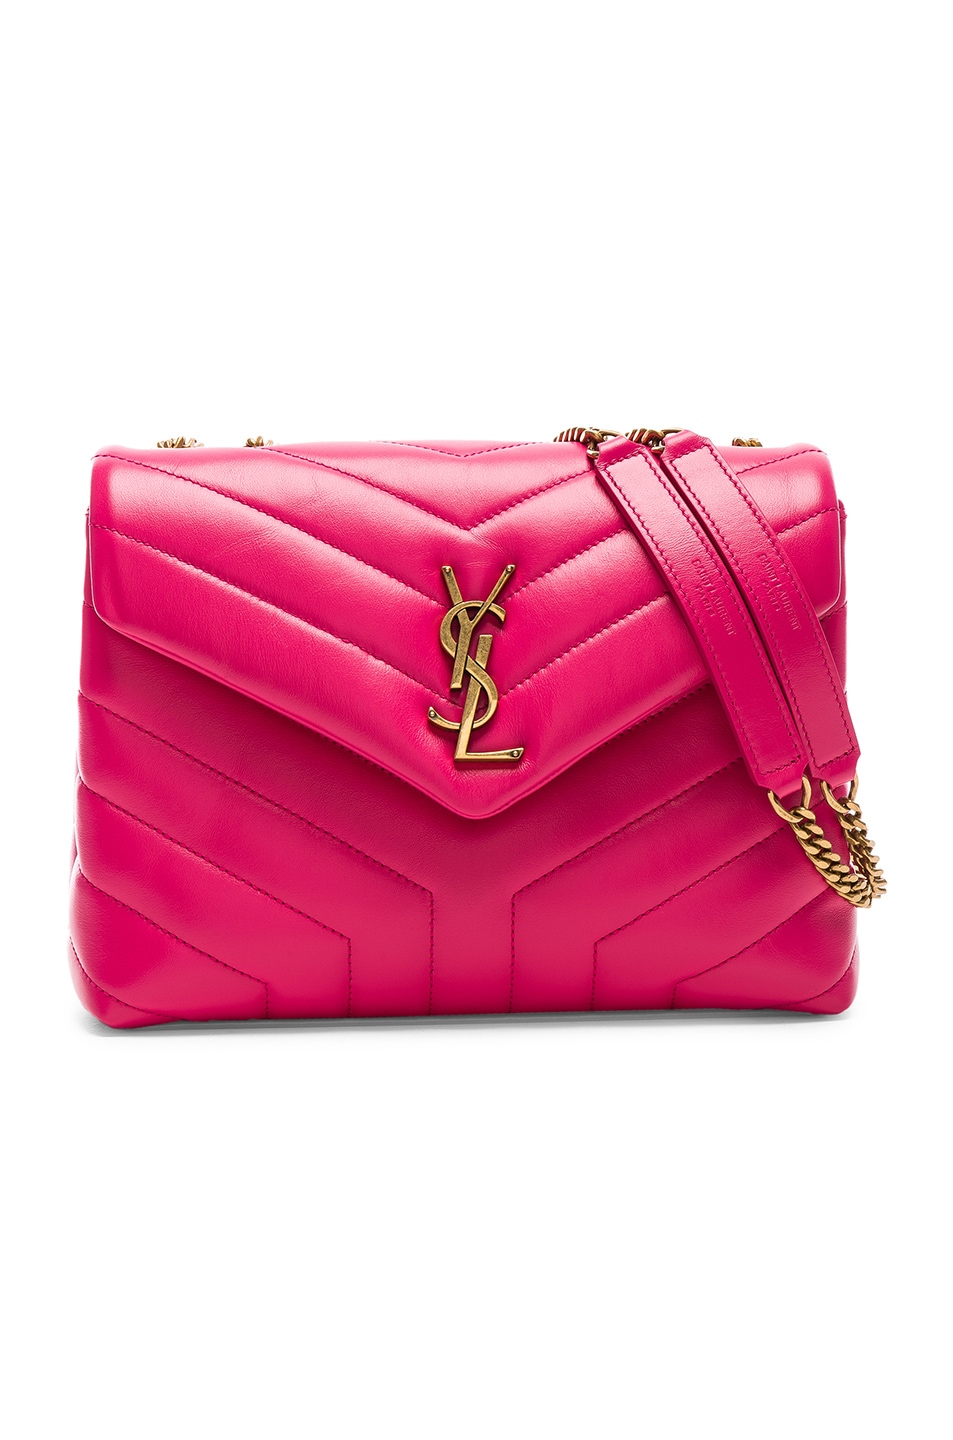 Image 1 of Saint Laurent Small Supple Monogramme Loulou Chain Bag in Shocking Pink